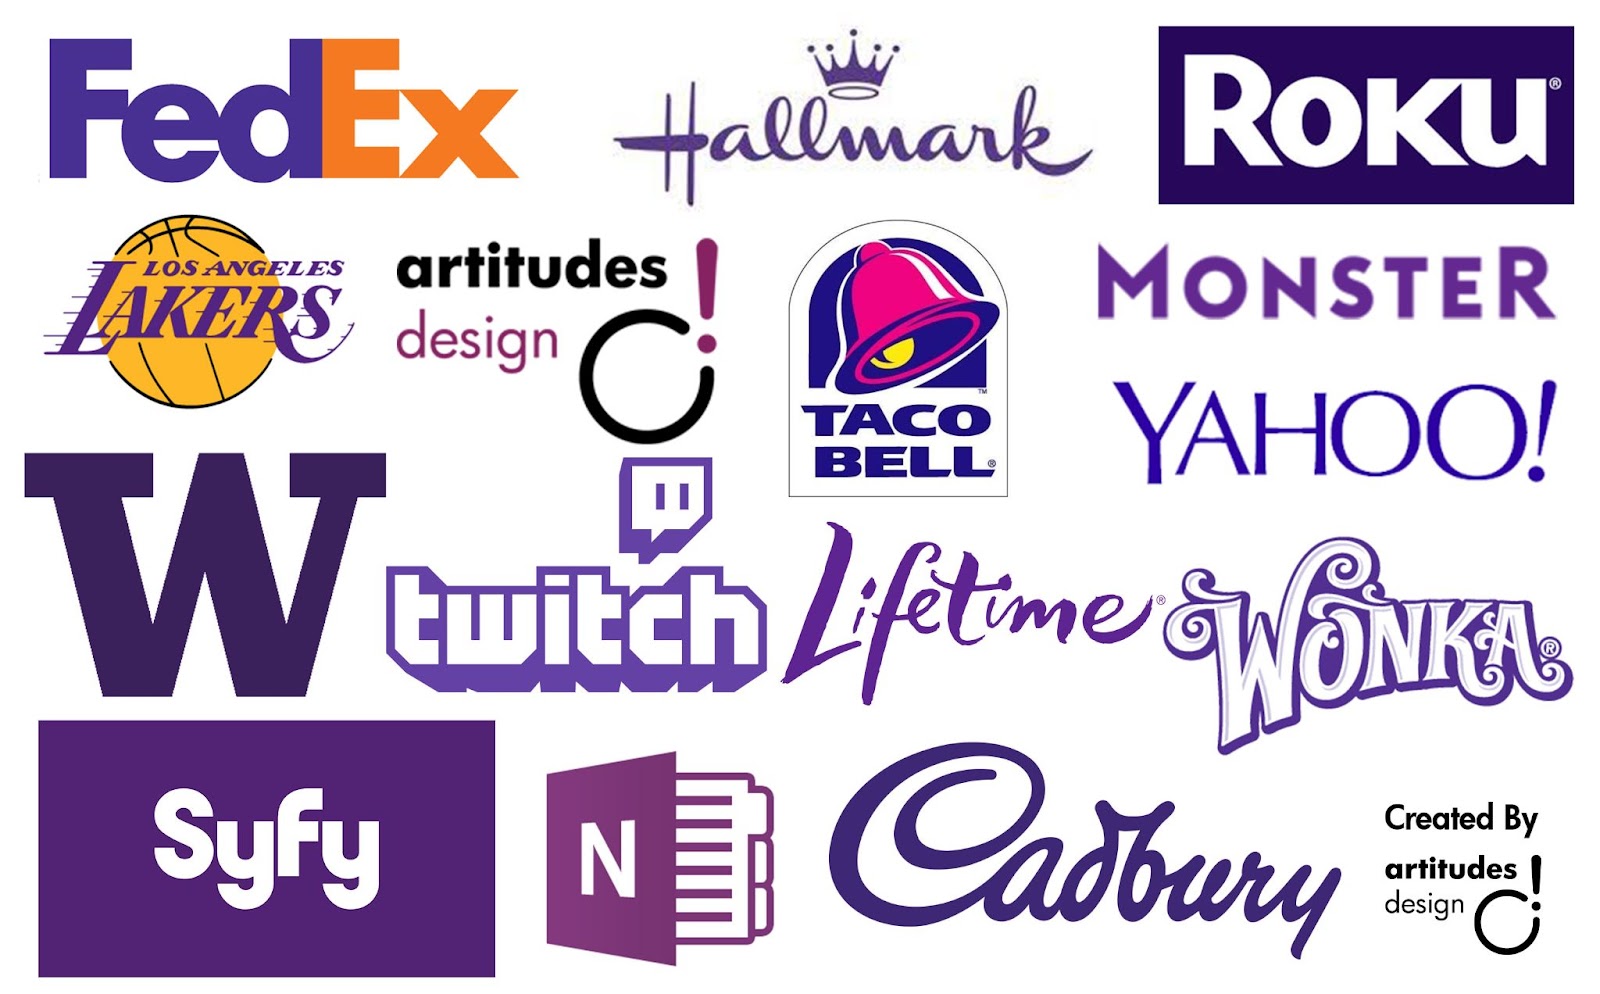 Color theory in marketing - Brands' logos in purple color.  